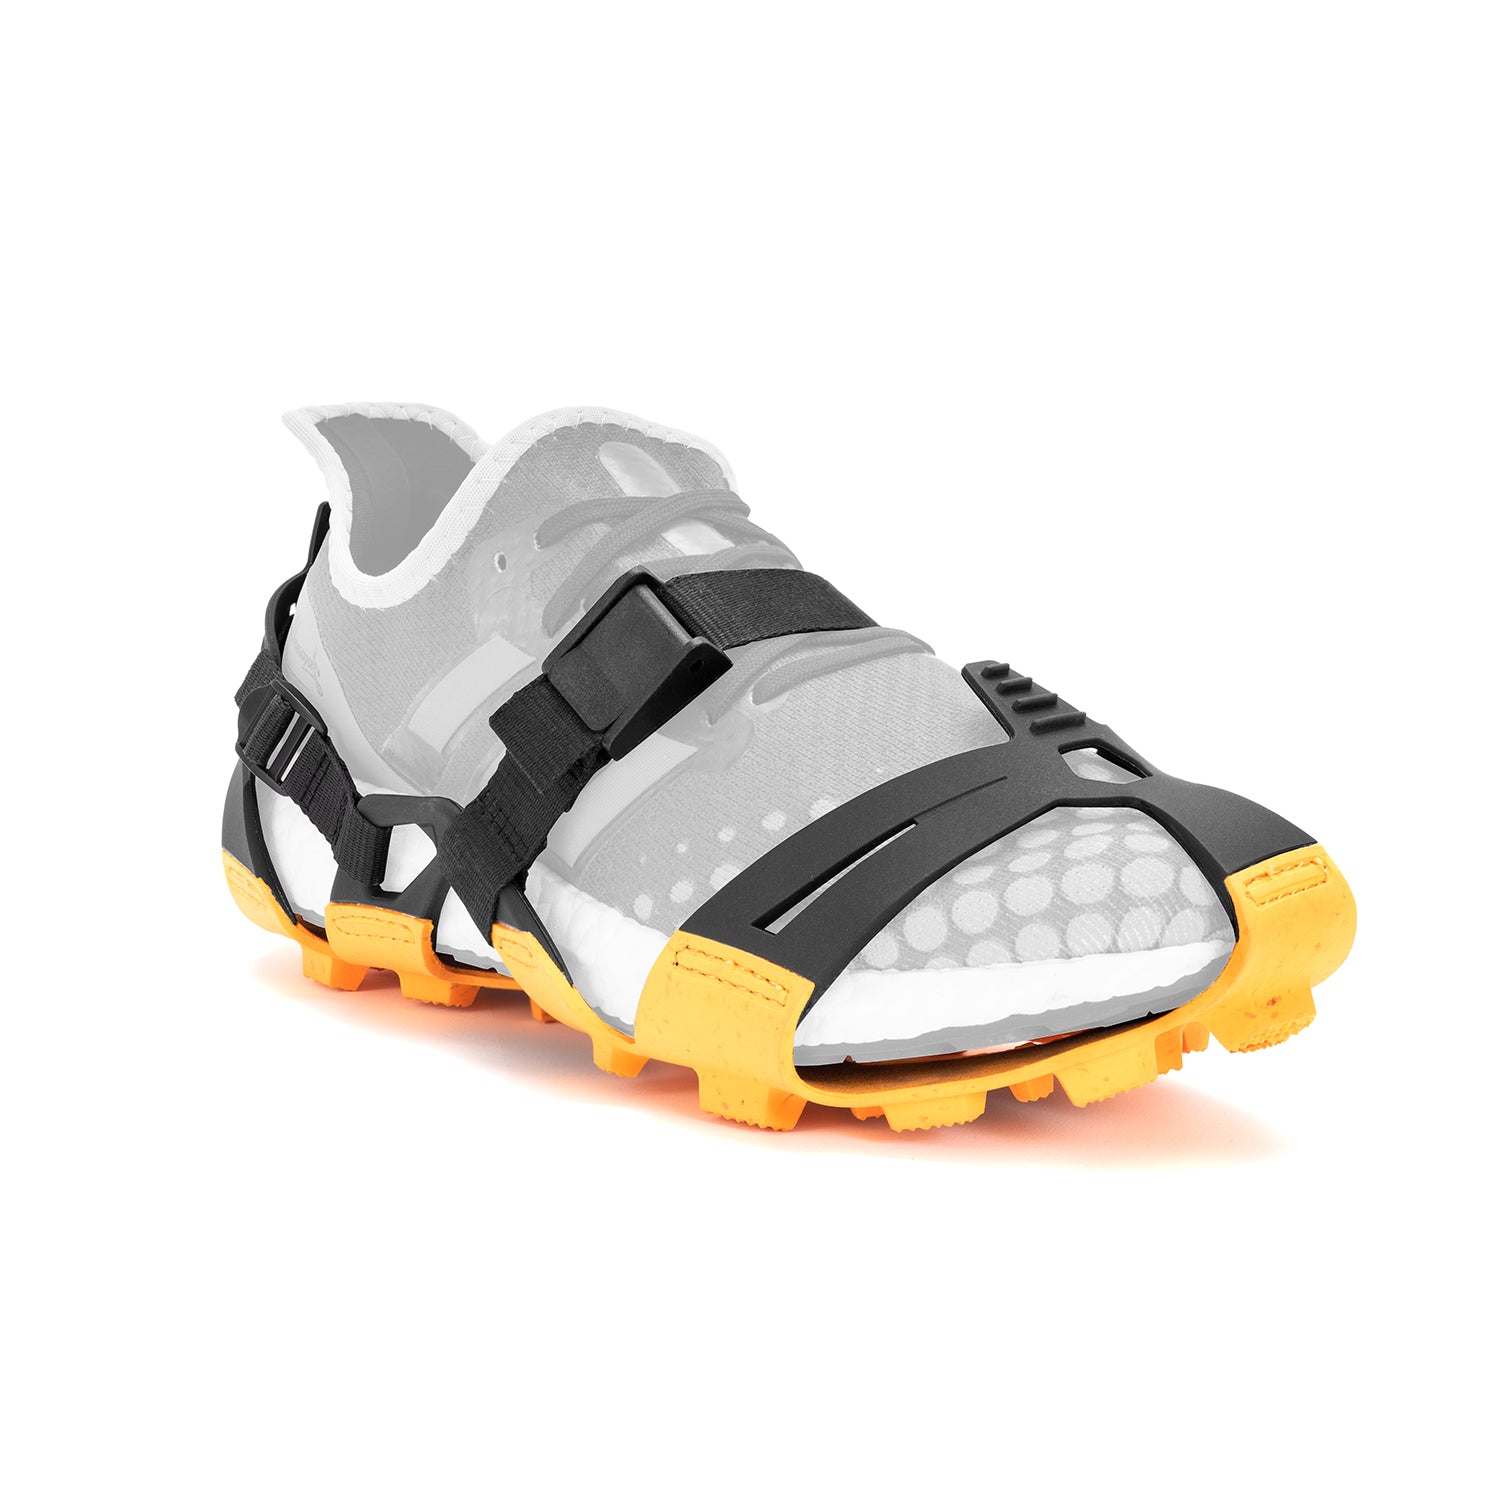 Traction Tread Runner  Rubber Runners by